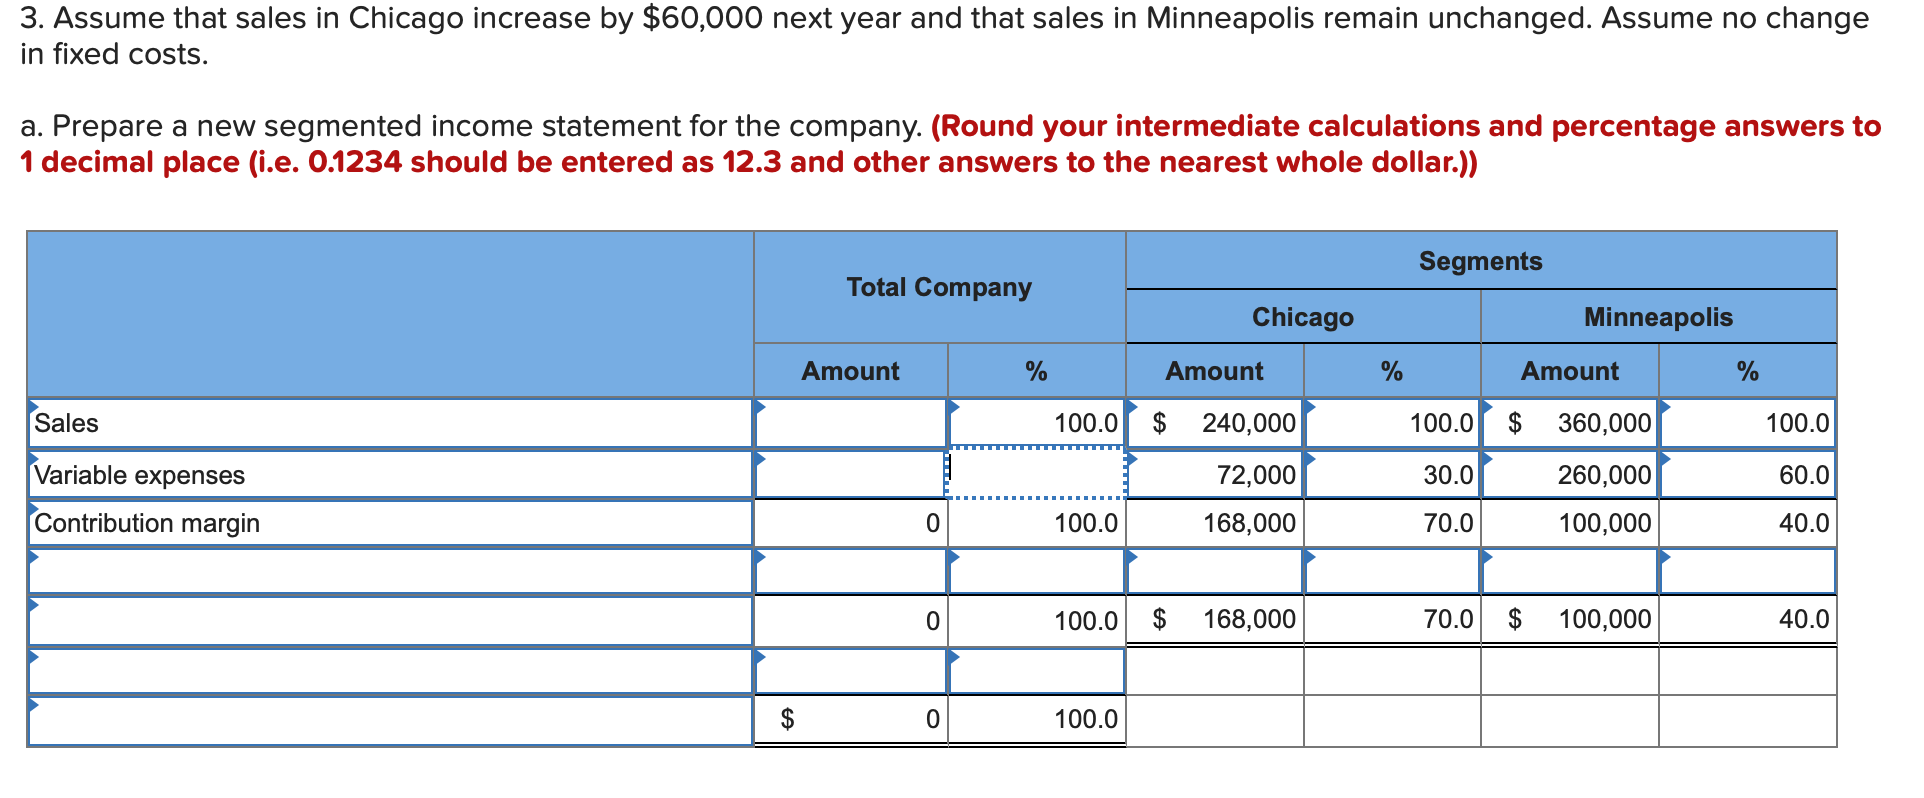 3. Assume that sales in Chicago increase by $60,000 next year and that sales in Minneapolis remain unchanged. Assume no chang